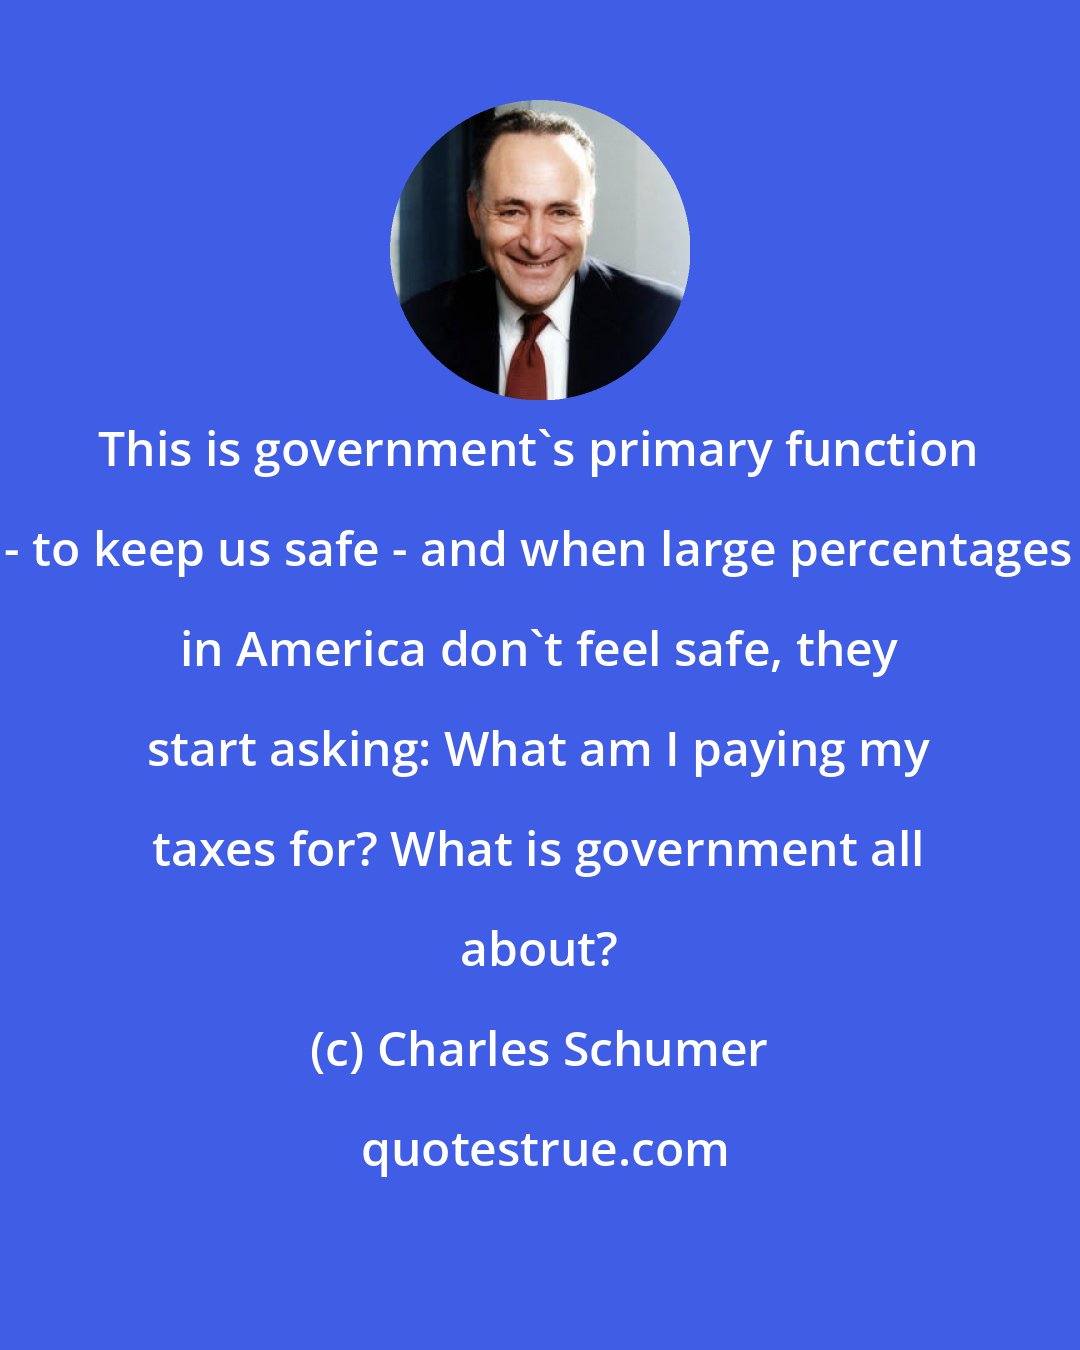 Charles Schumer: This is government's primary function - to keep us safe - and when large percentages in America don't feel safe, they start asking: What am I paying my taxes for? What is government all about?